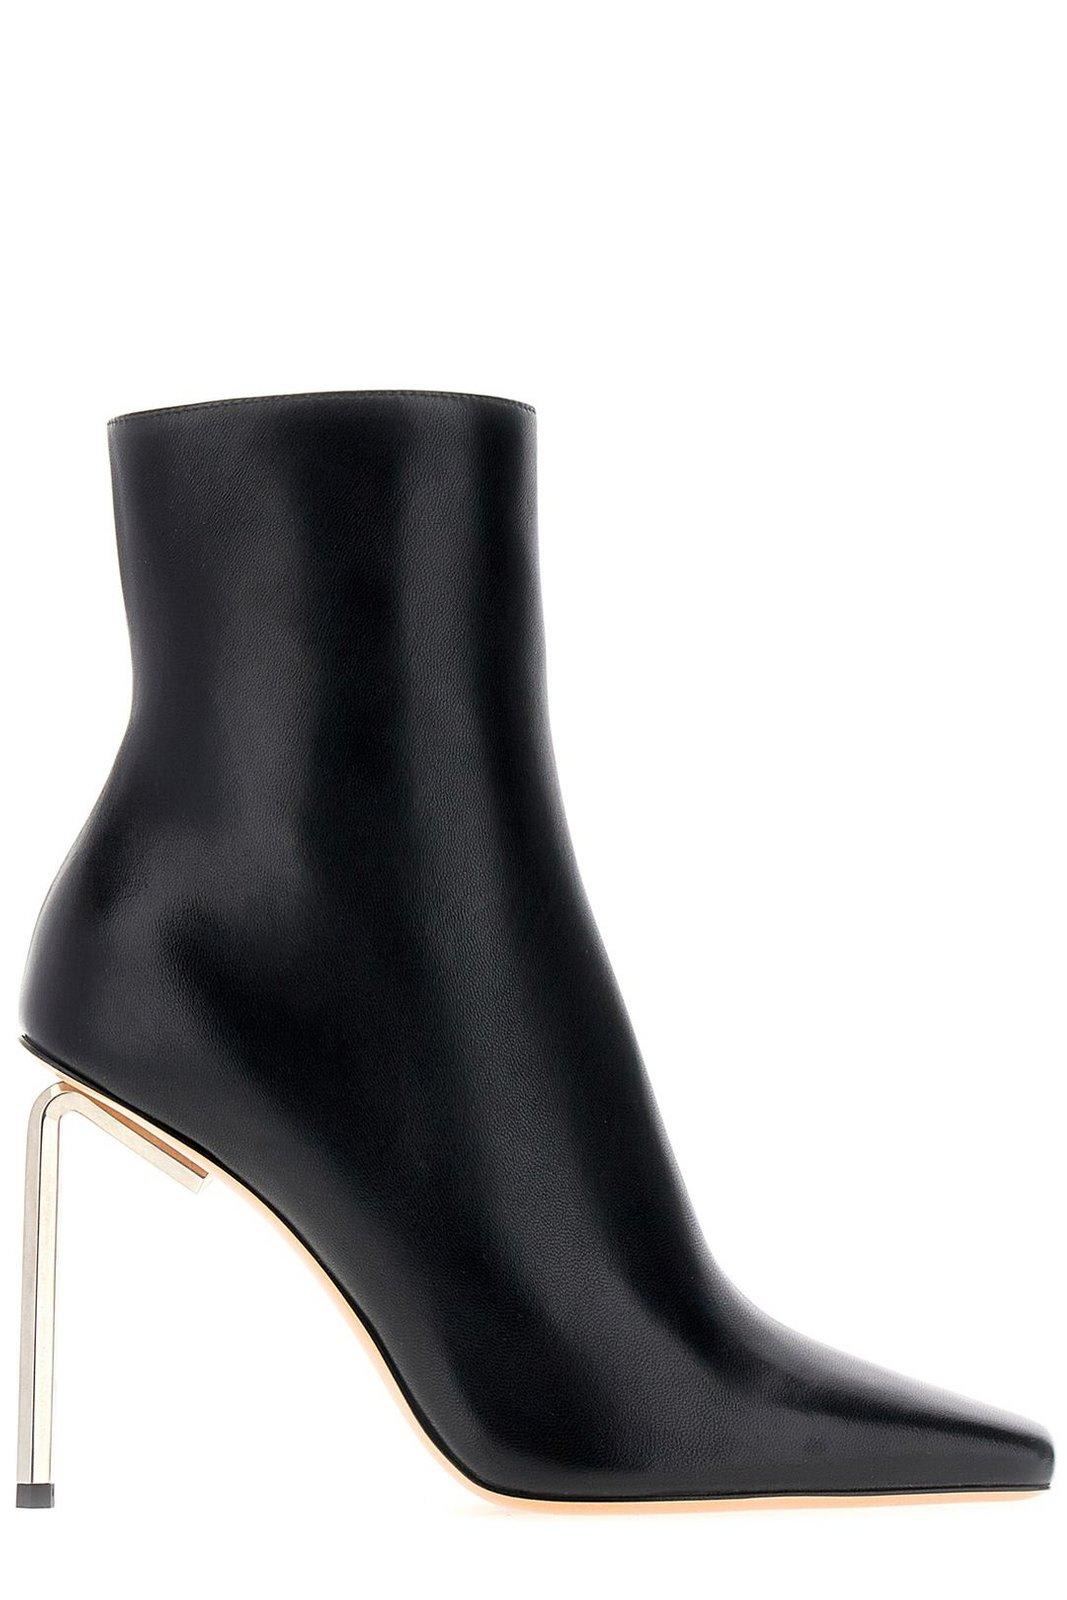 OFF-WHITE ALLEN SQUARE TOE ANKLE BOOTS